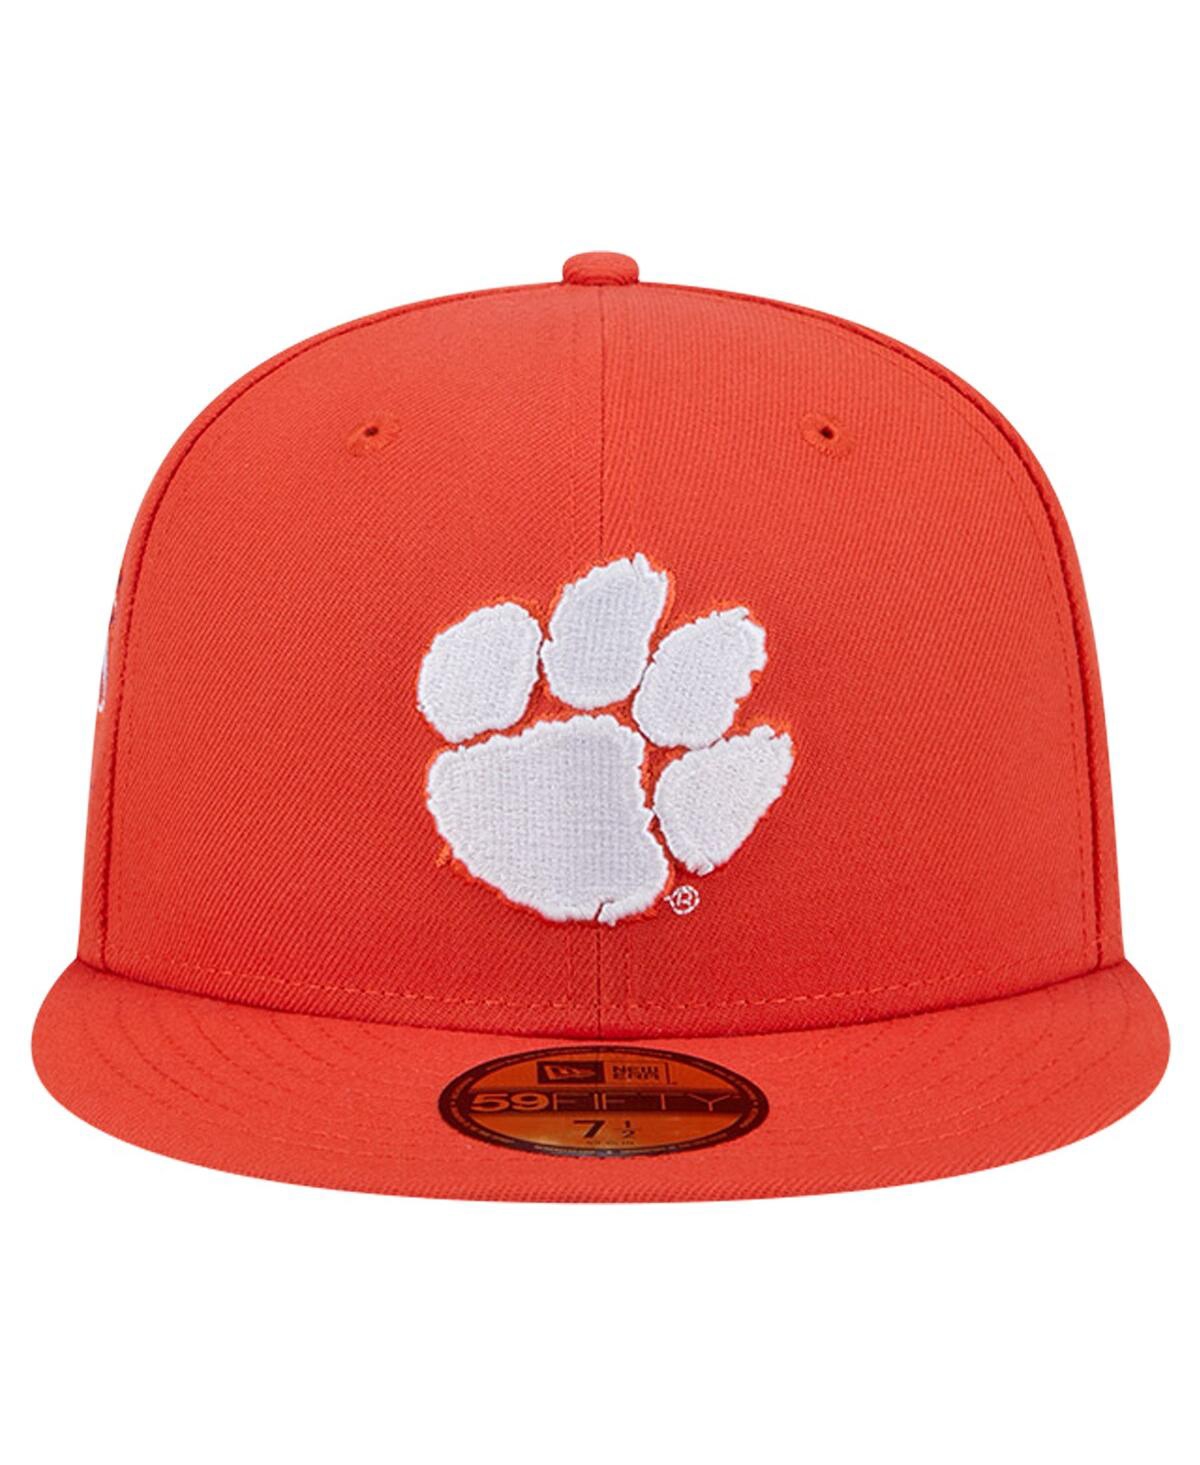 Shop New Era Men's Orange Clemson Tigers Throwback 59fifty Fitted Hat